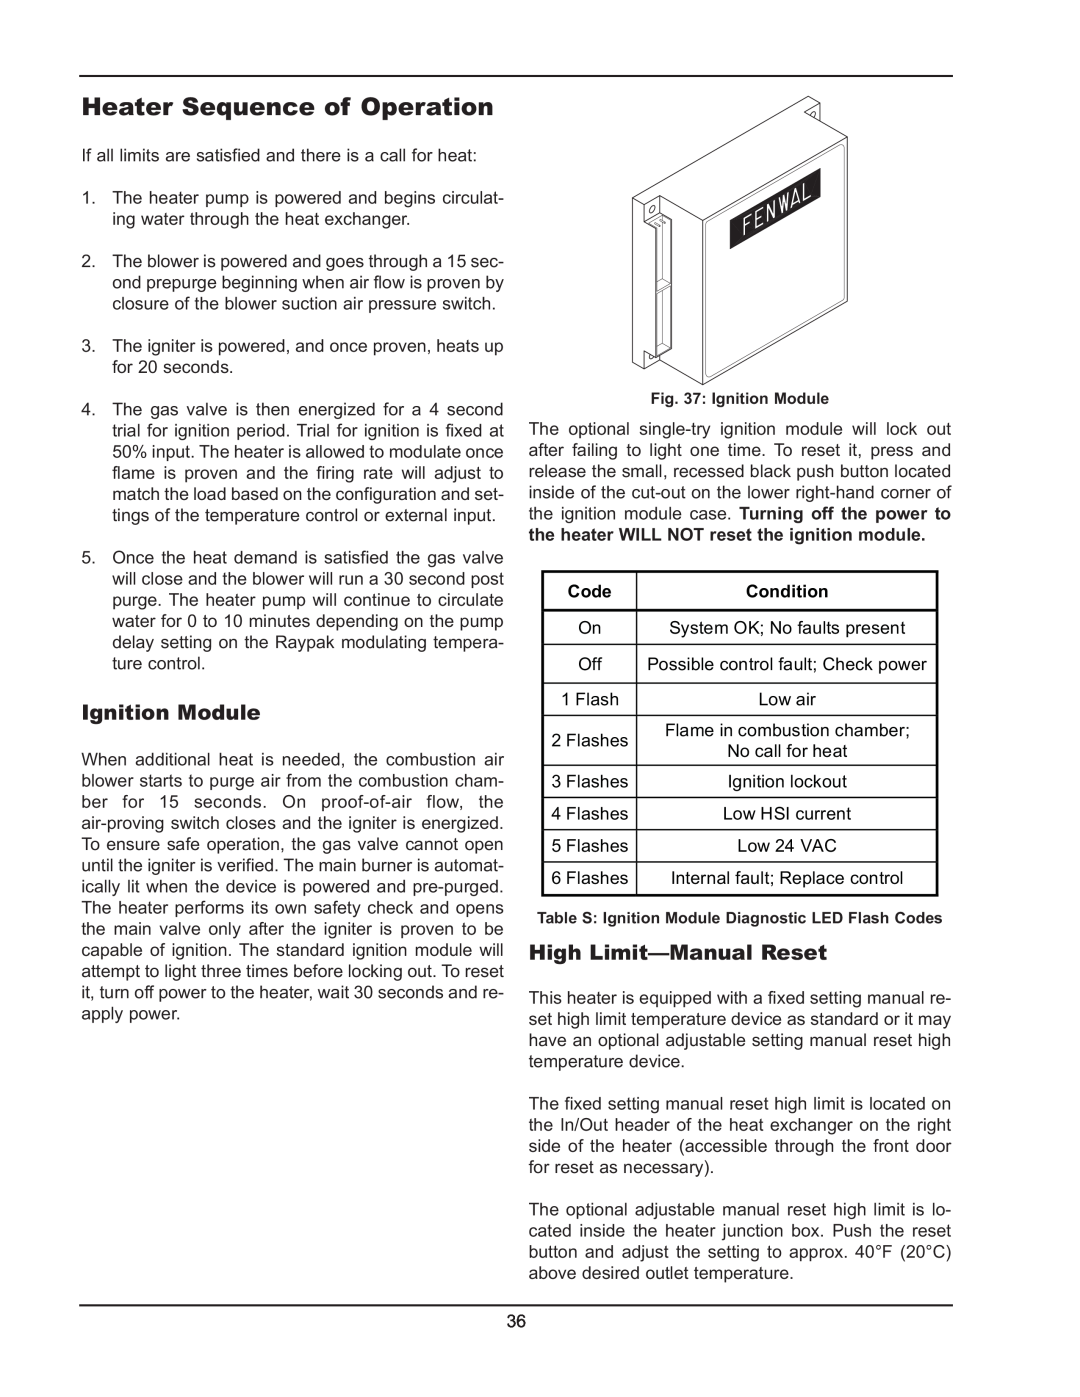 Raypak 503-2003 manual Heater Sequence of Operation, Ignition Module, High Limit-ManualReset, Code, Condition 